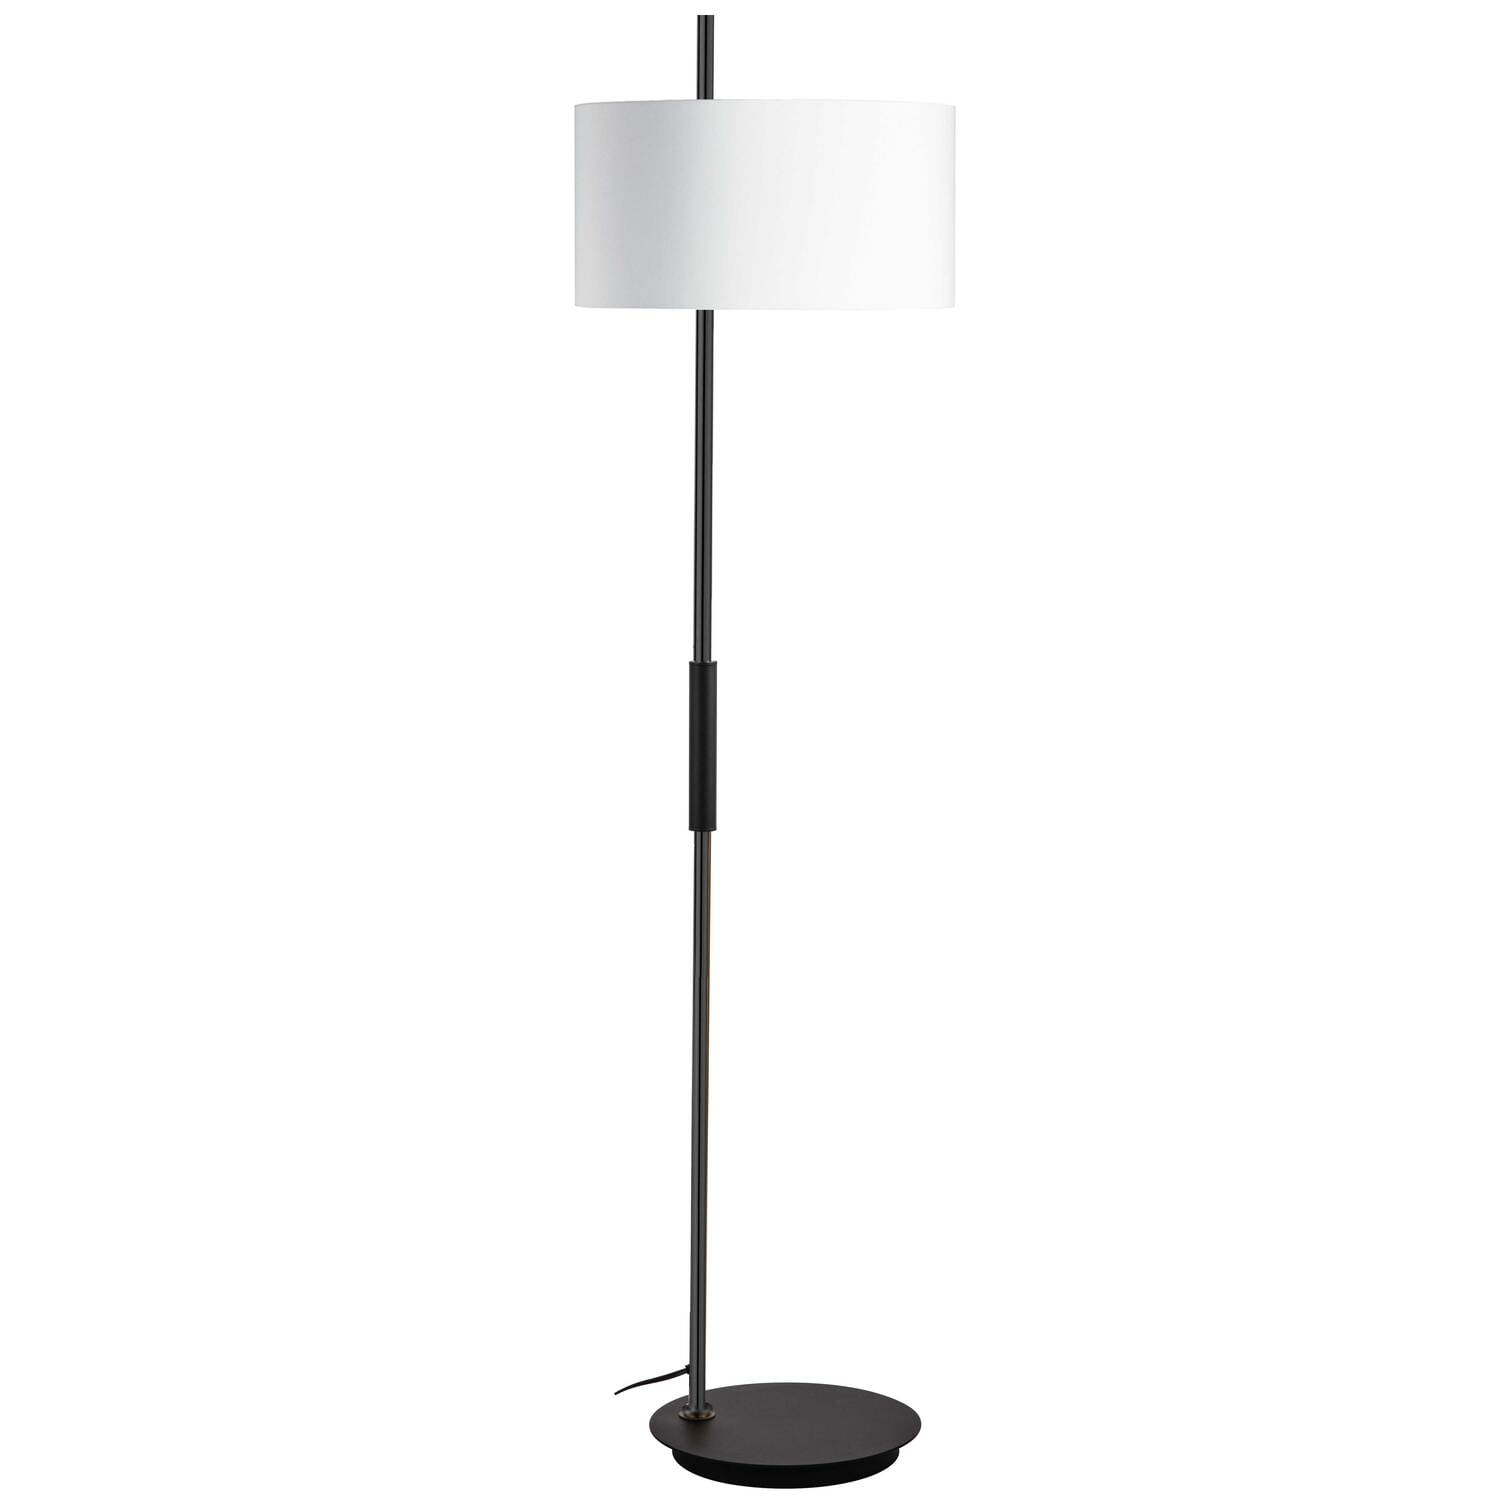 Picture of Dainolite FTG-622F-MB-WH 1 Light Incandescent Floor Lamp, Matte Black with White Shade